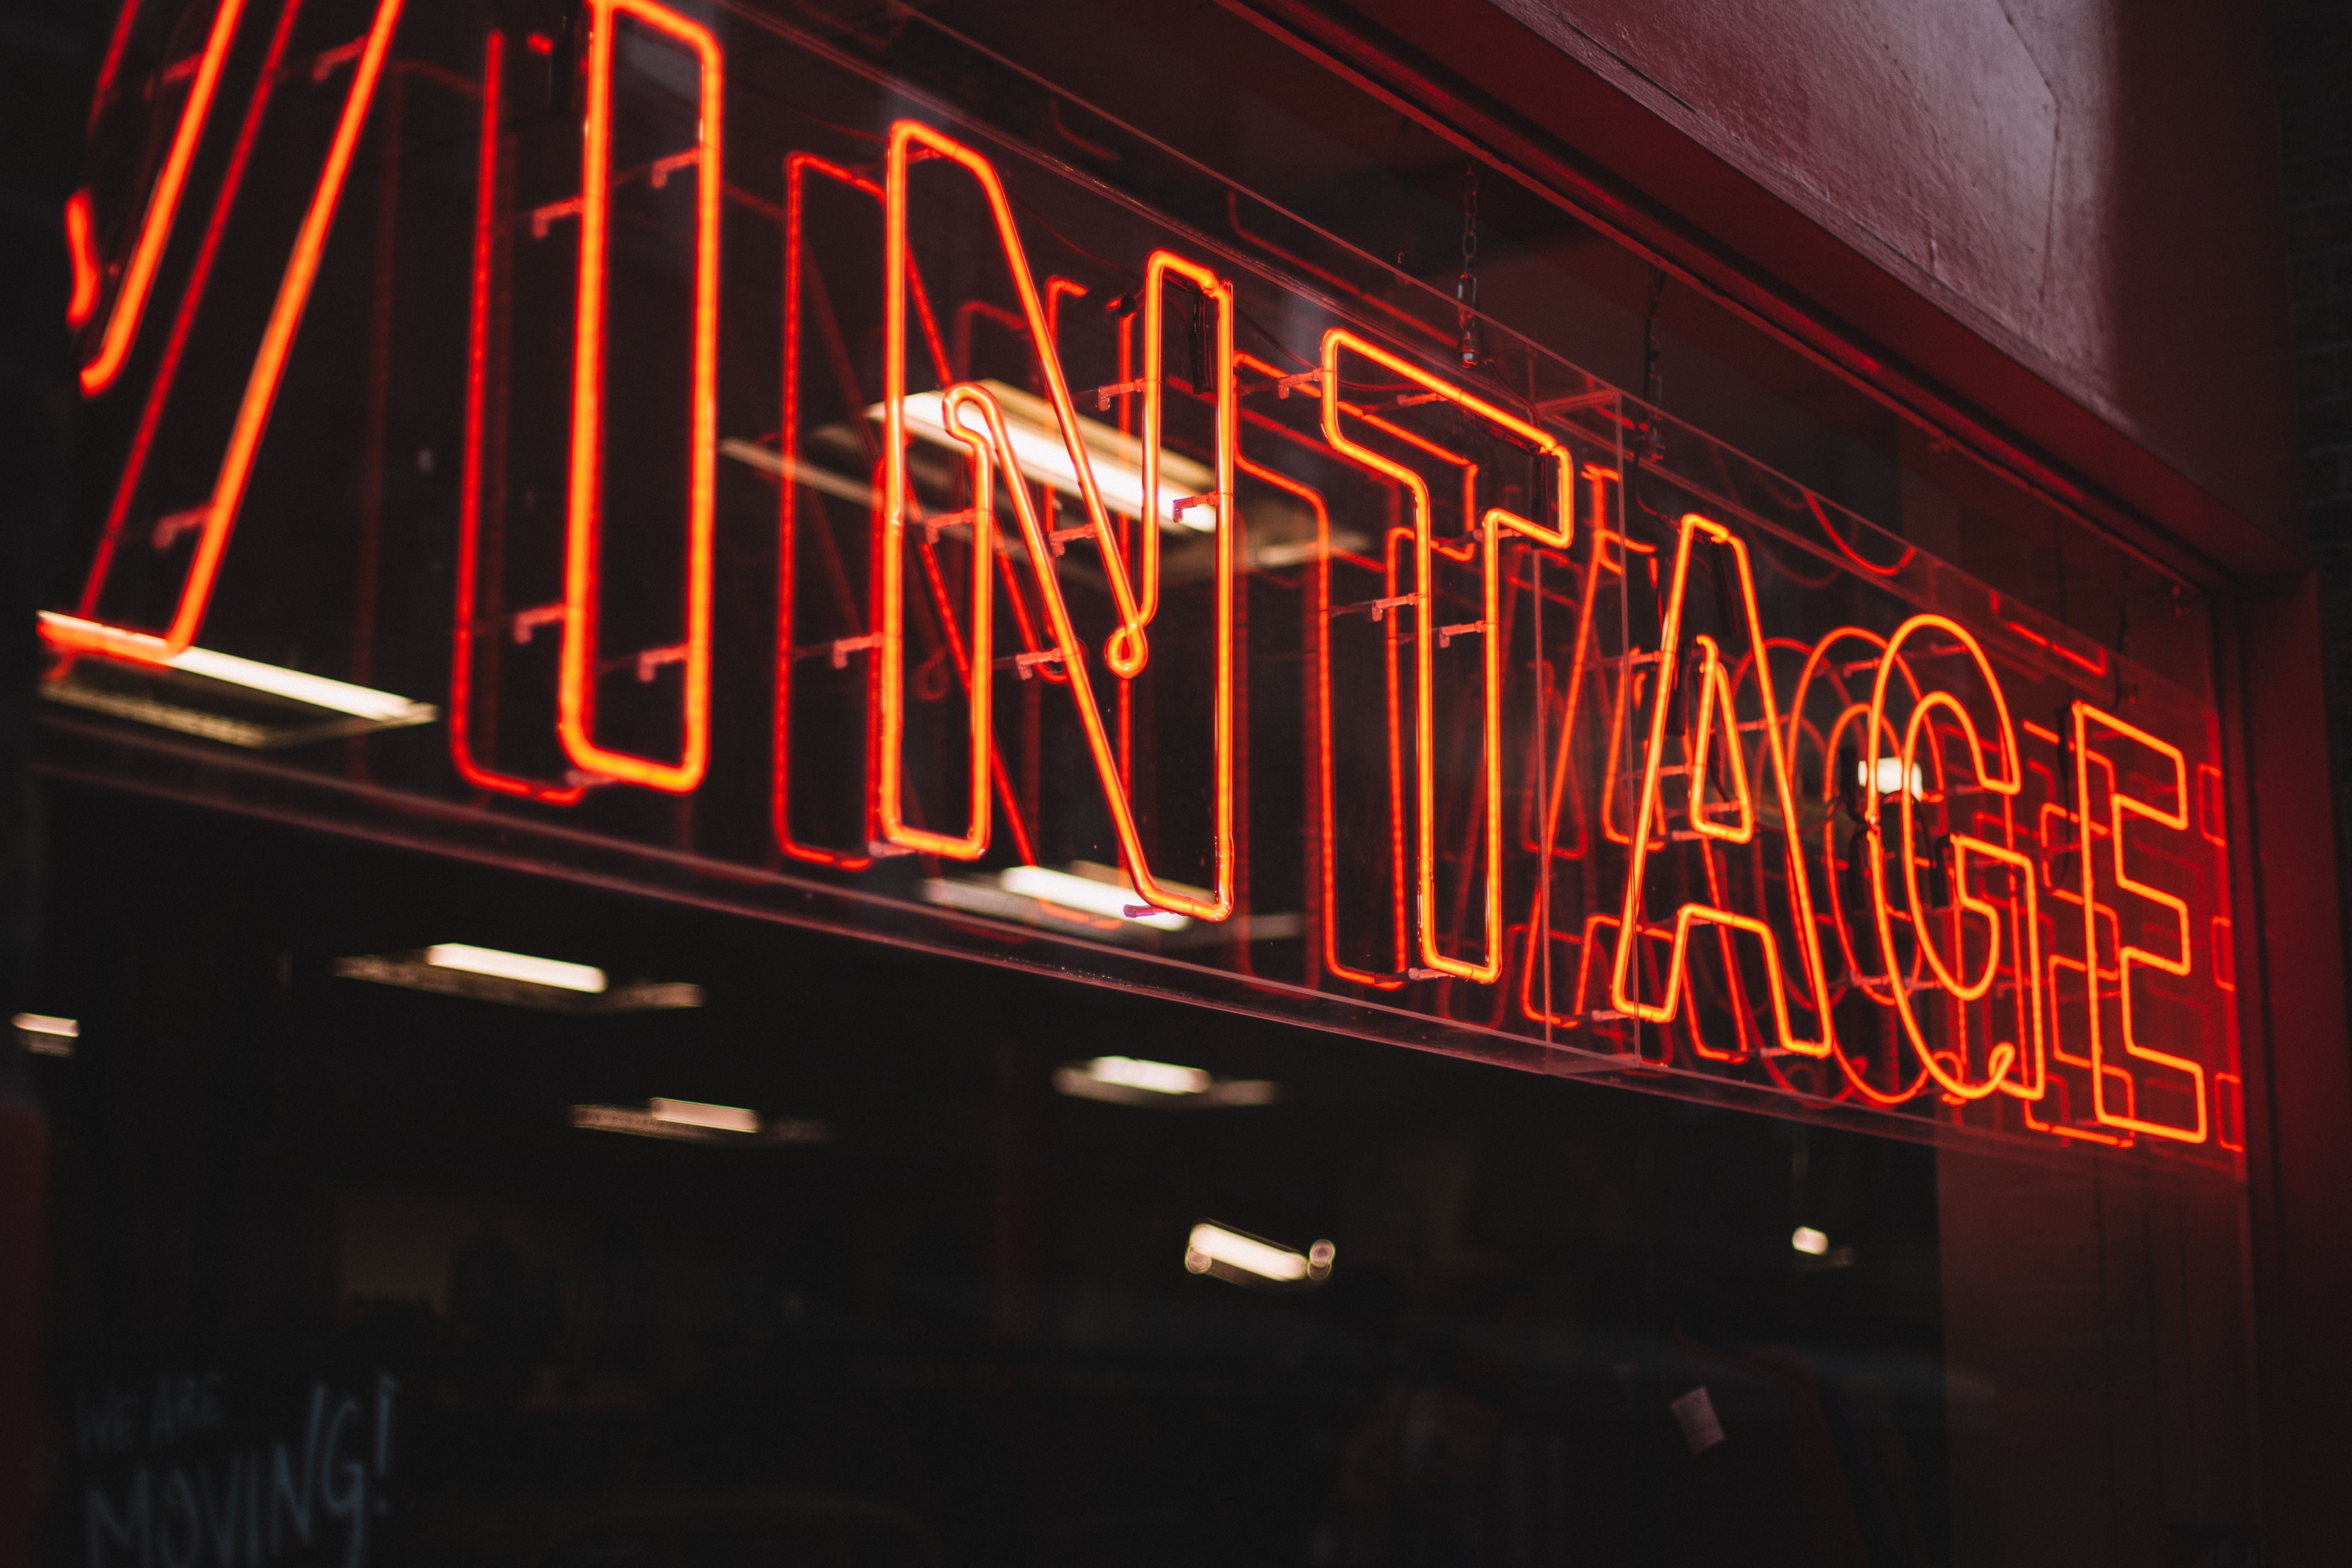 5400x3600 retro, signage, window, shop, PNG image, wall, city, design, market, store, sign, background, letter, flashing, red, light, neon, urban, fashion, vintage, style Gallery HD Wallpaper